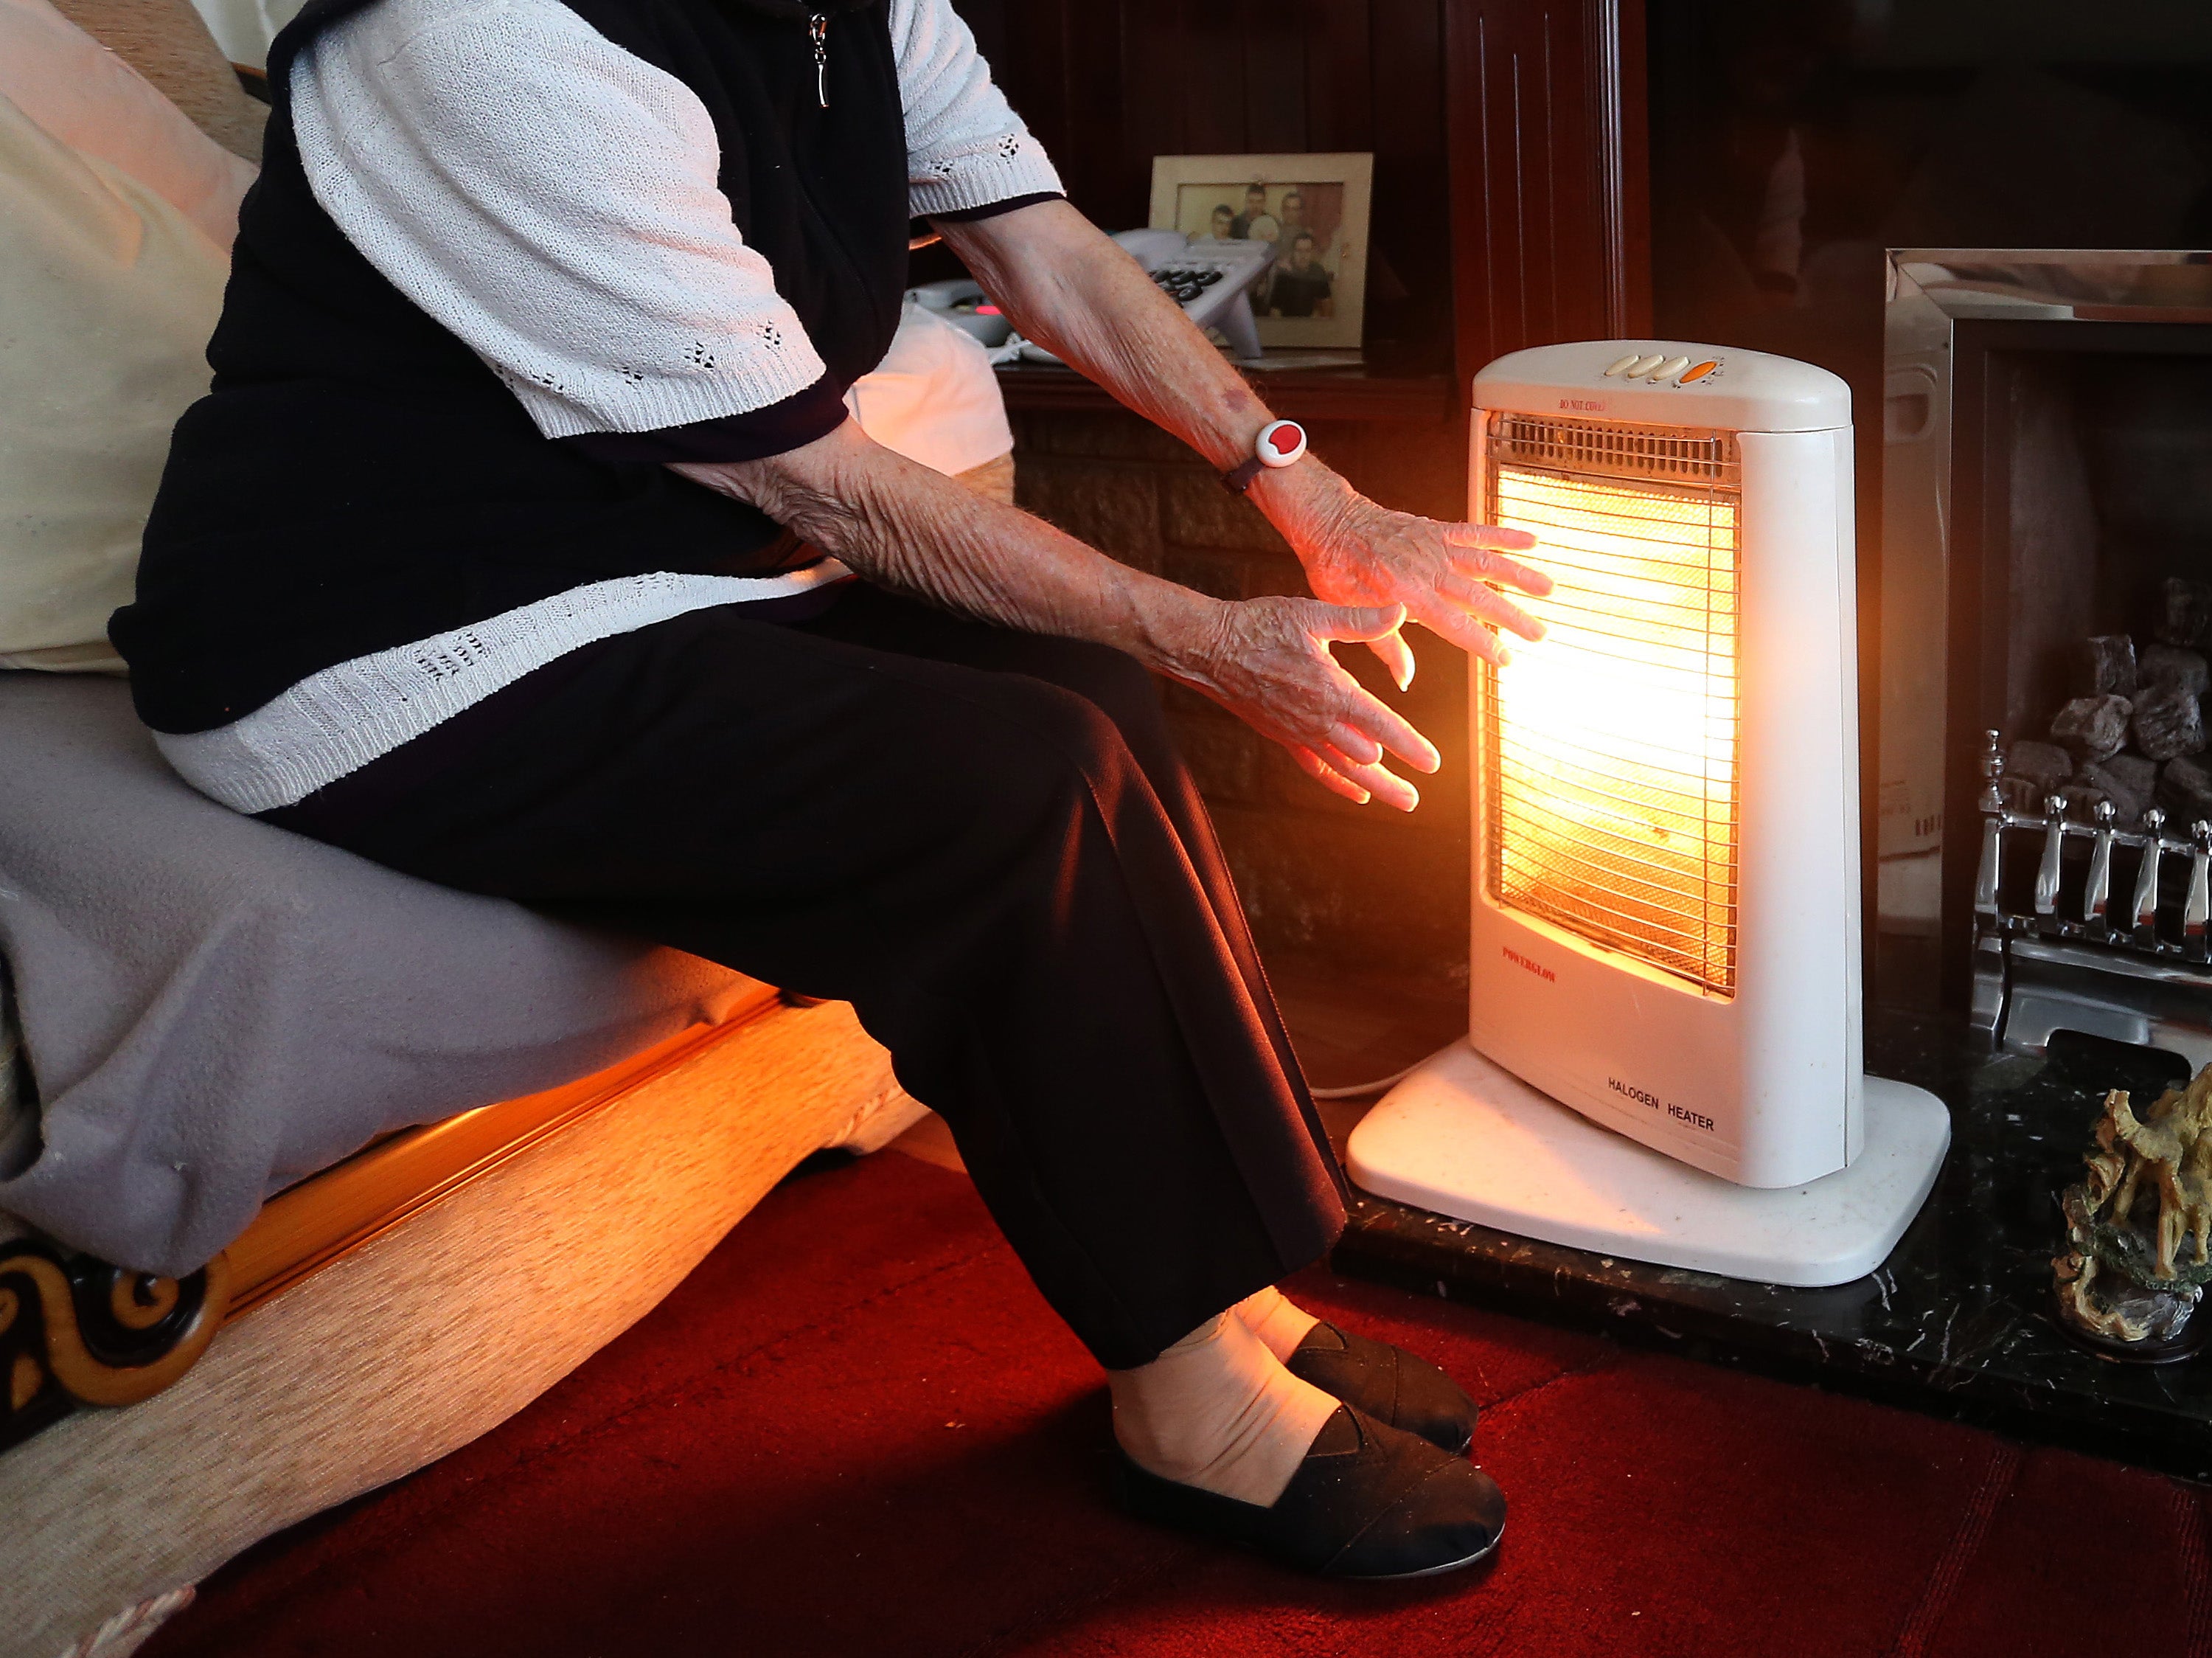 Energy bills are set to rise on 1 October